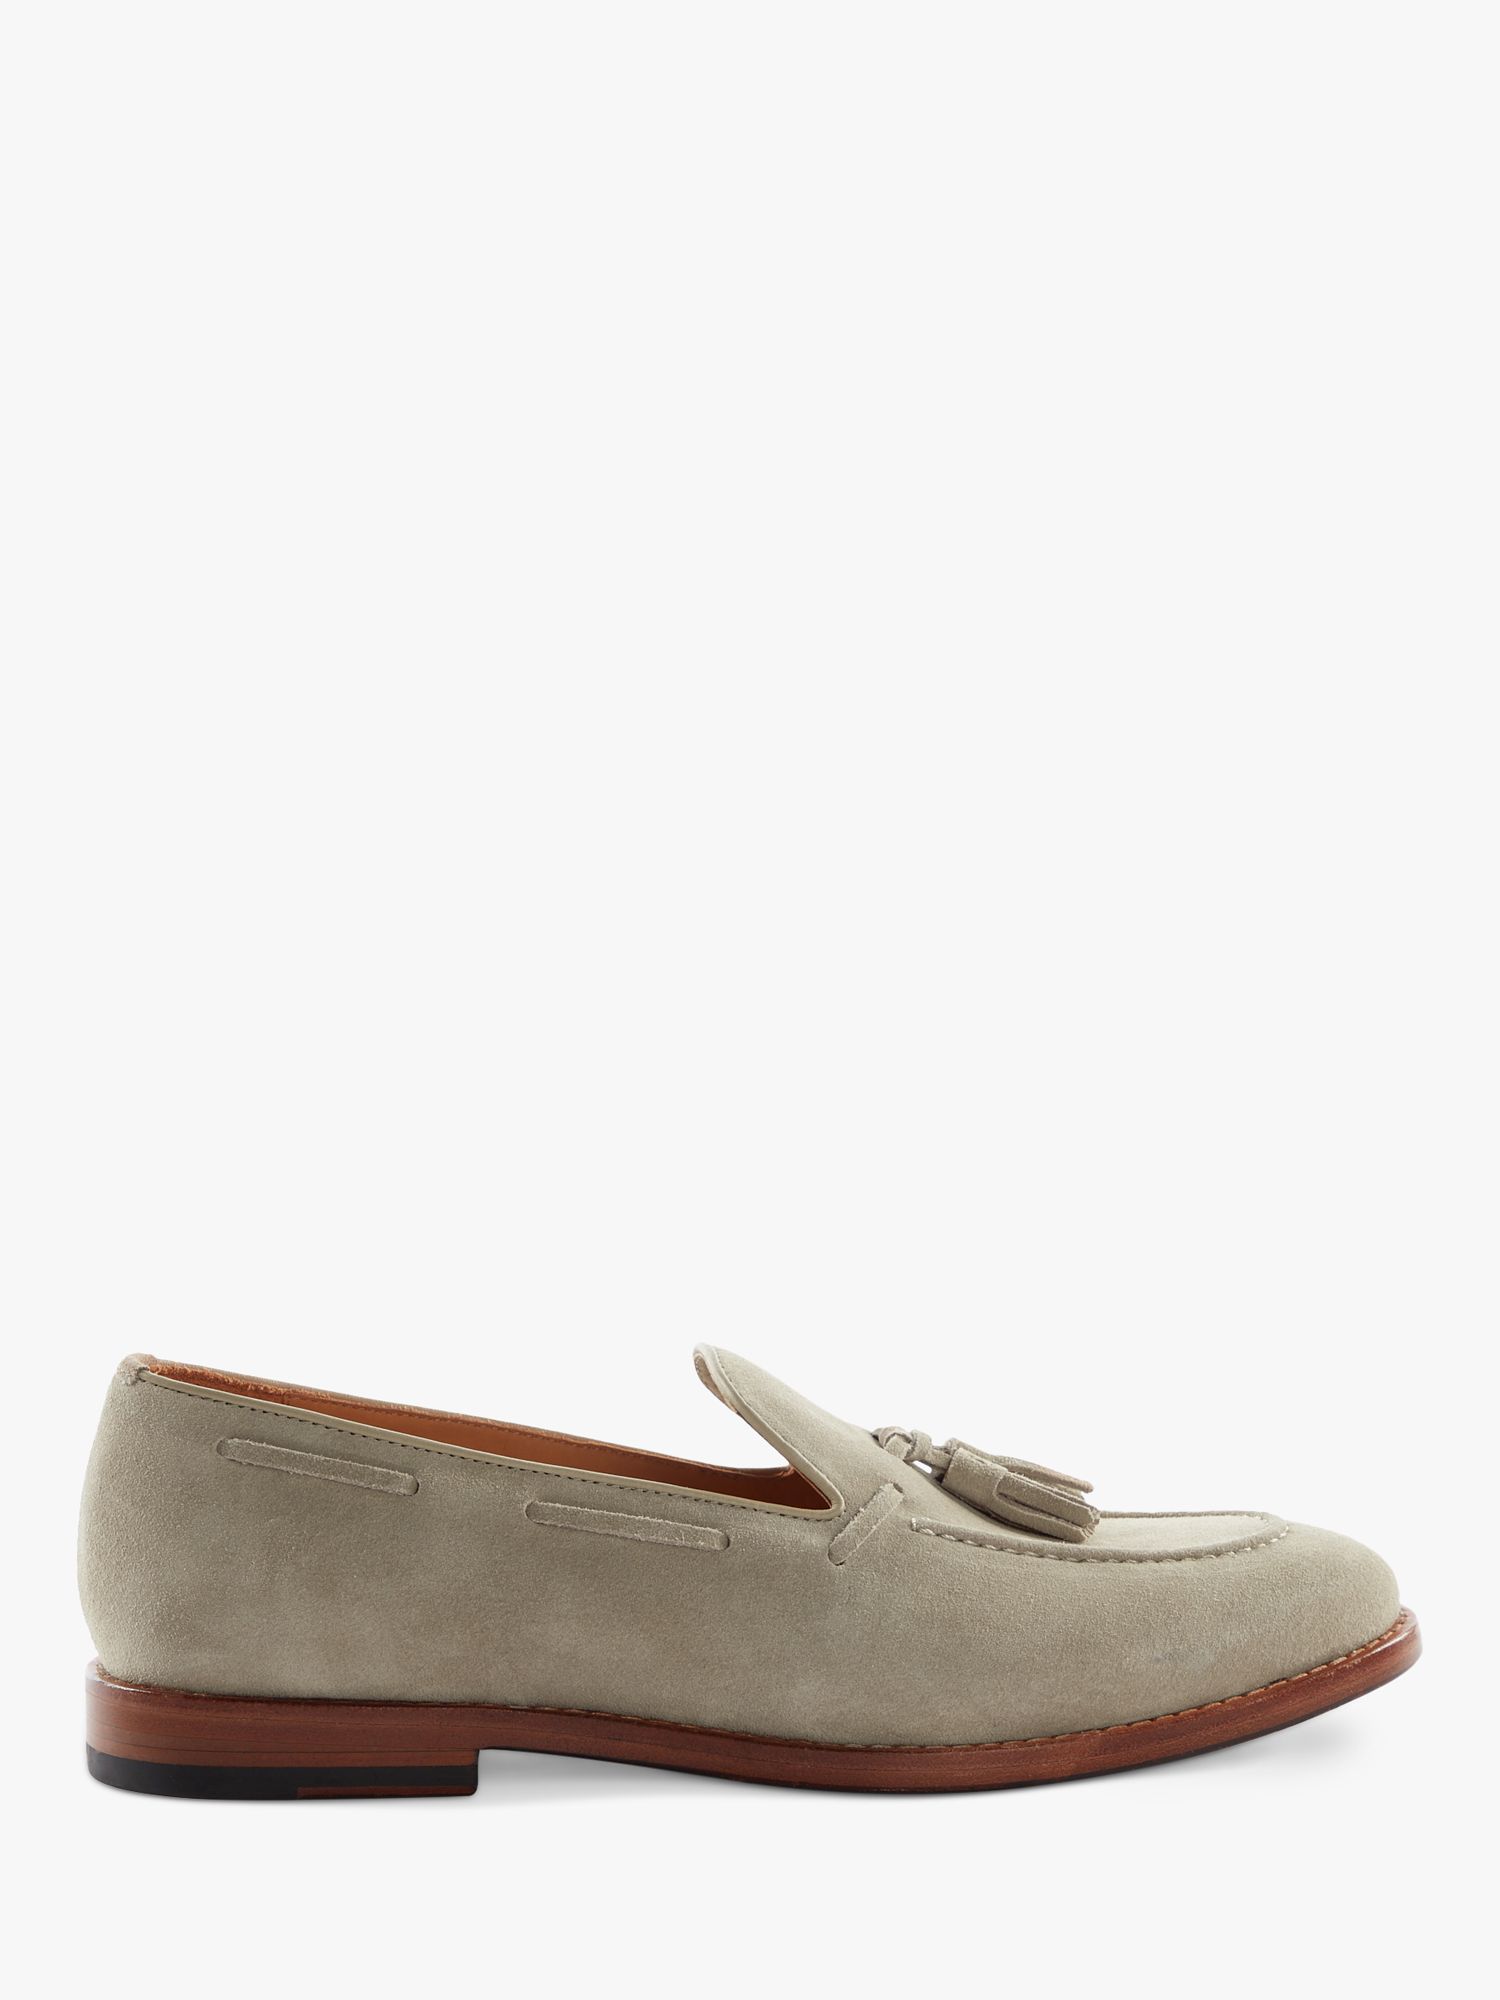 Dune Sandders Leather Tassel Loafers, Taupe, 6